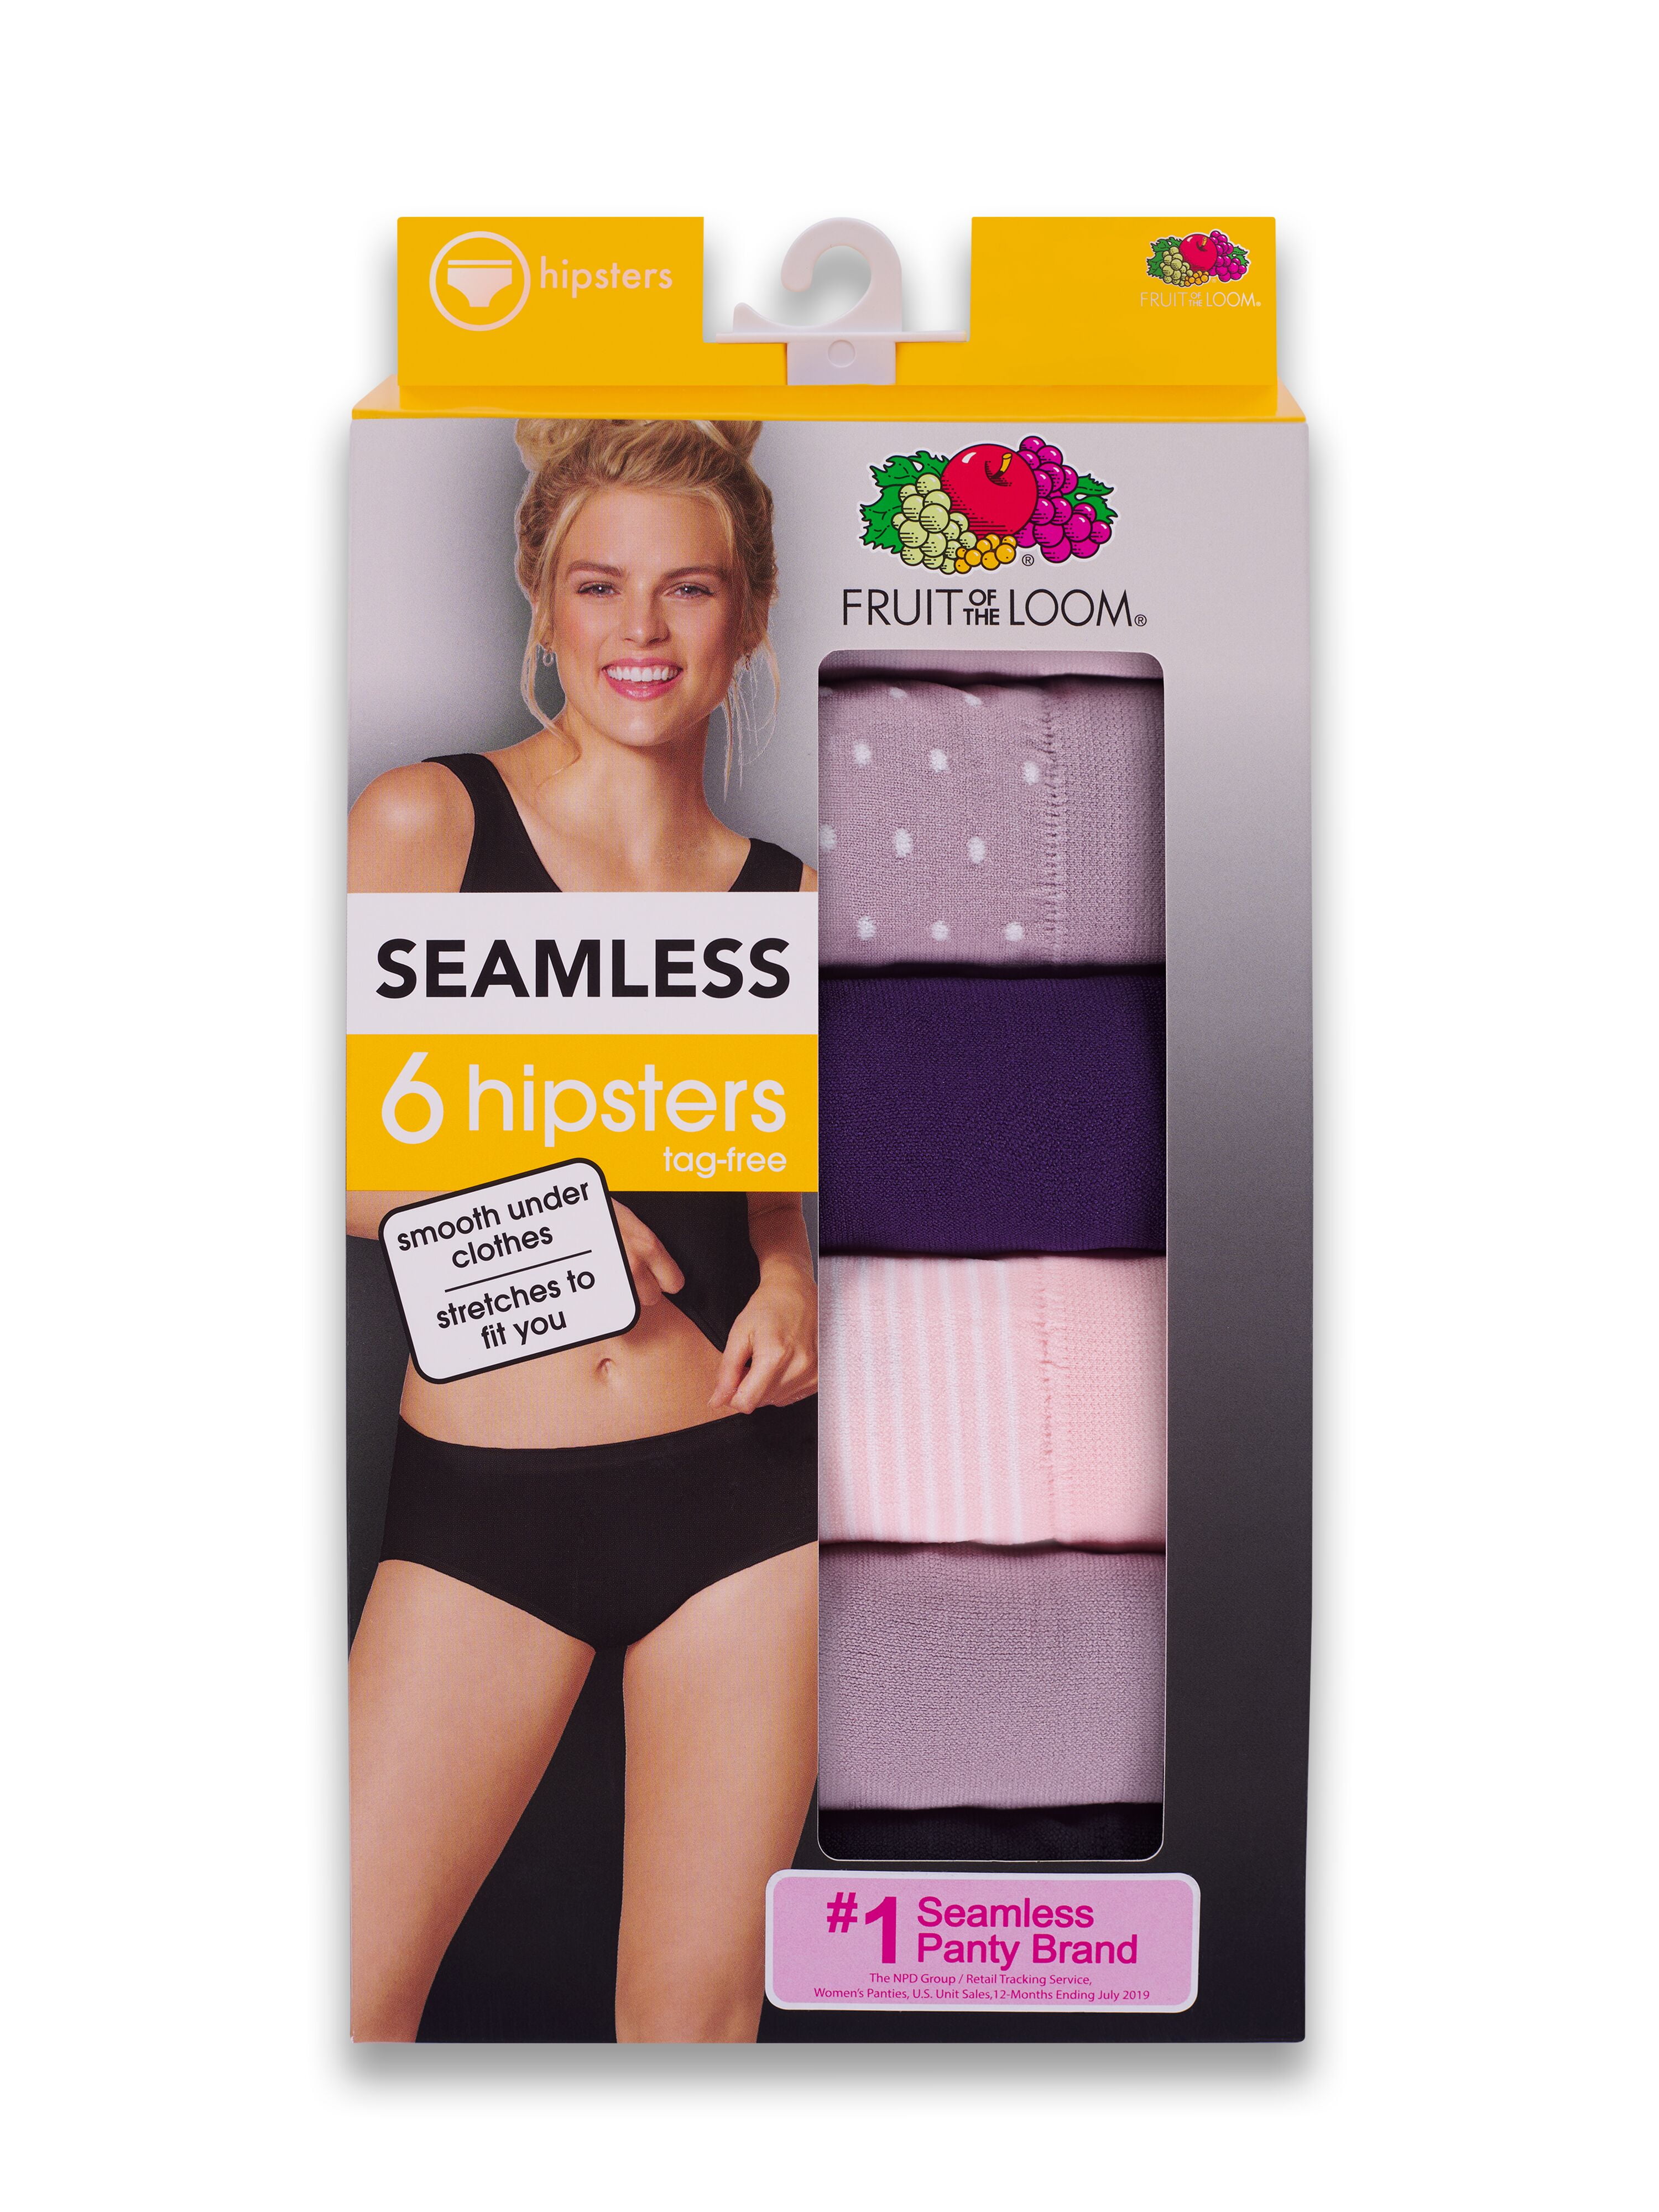 Fruit of the Loom Seamless Underwear is on sale at